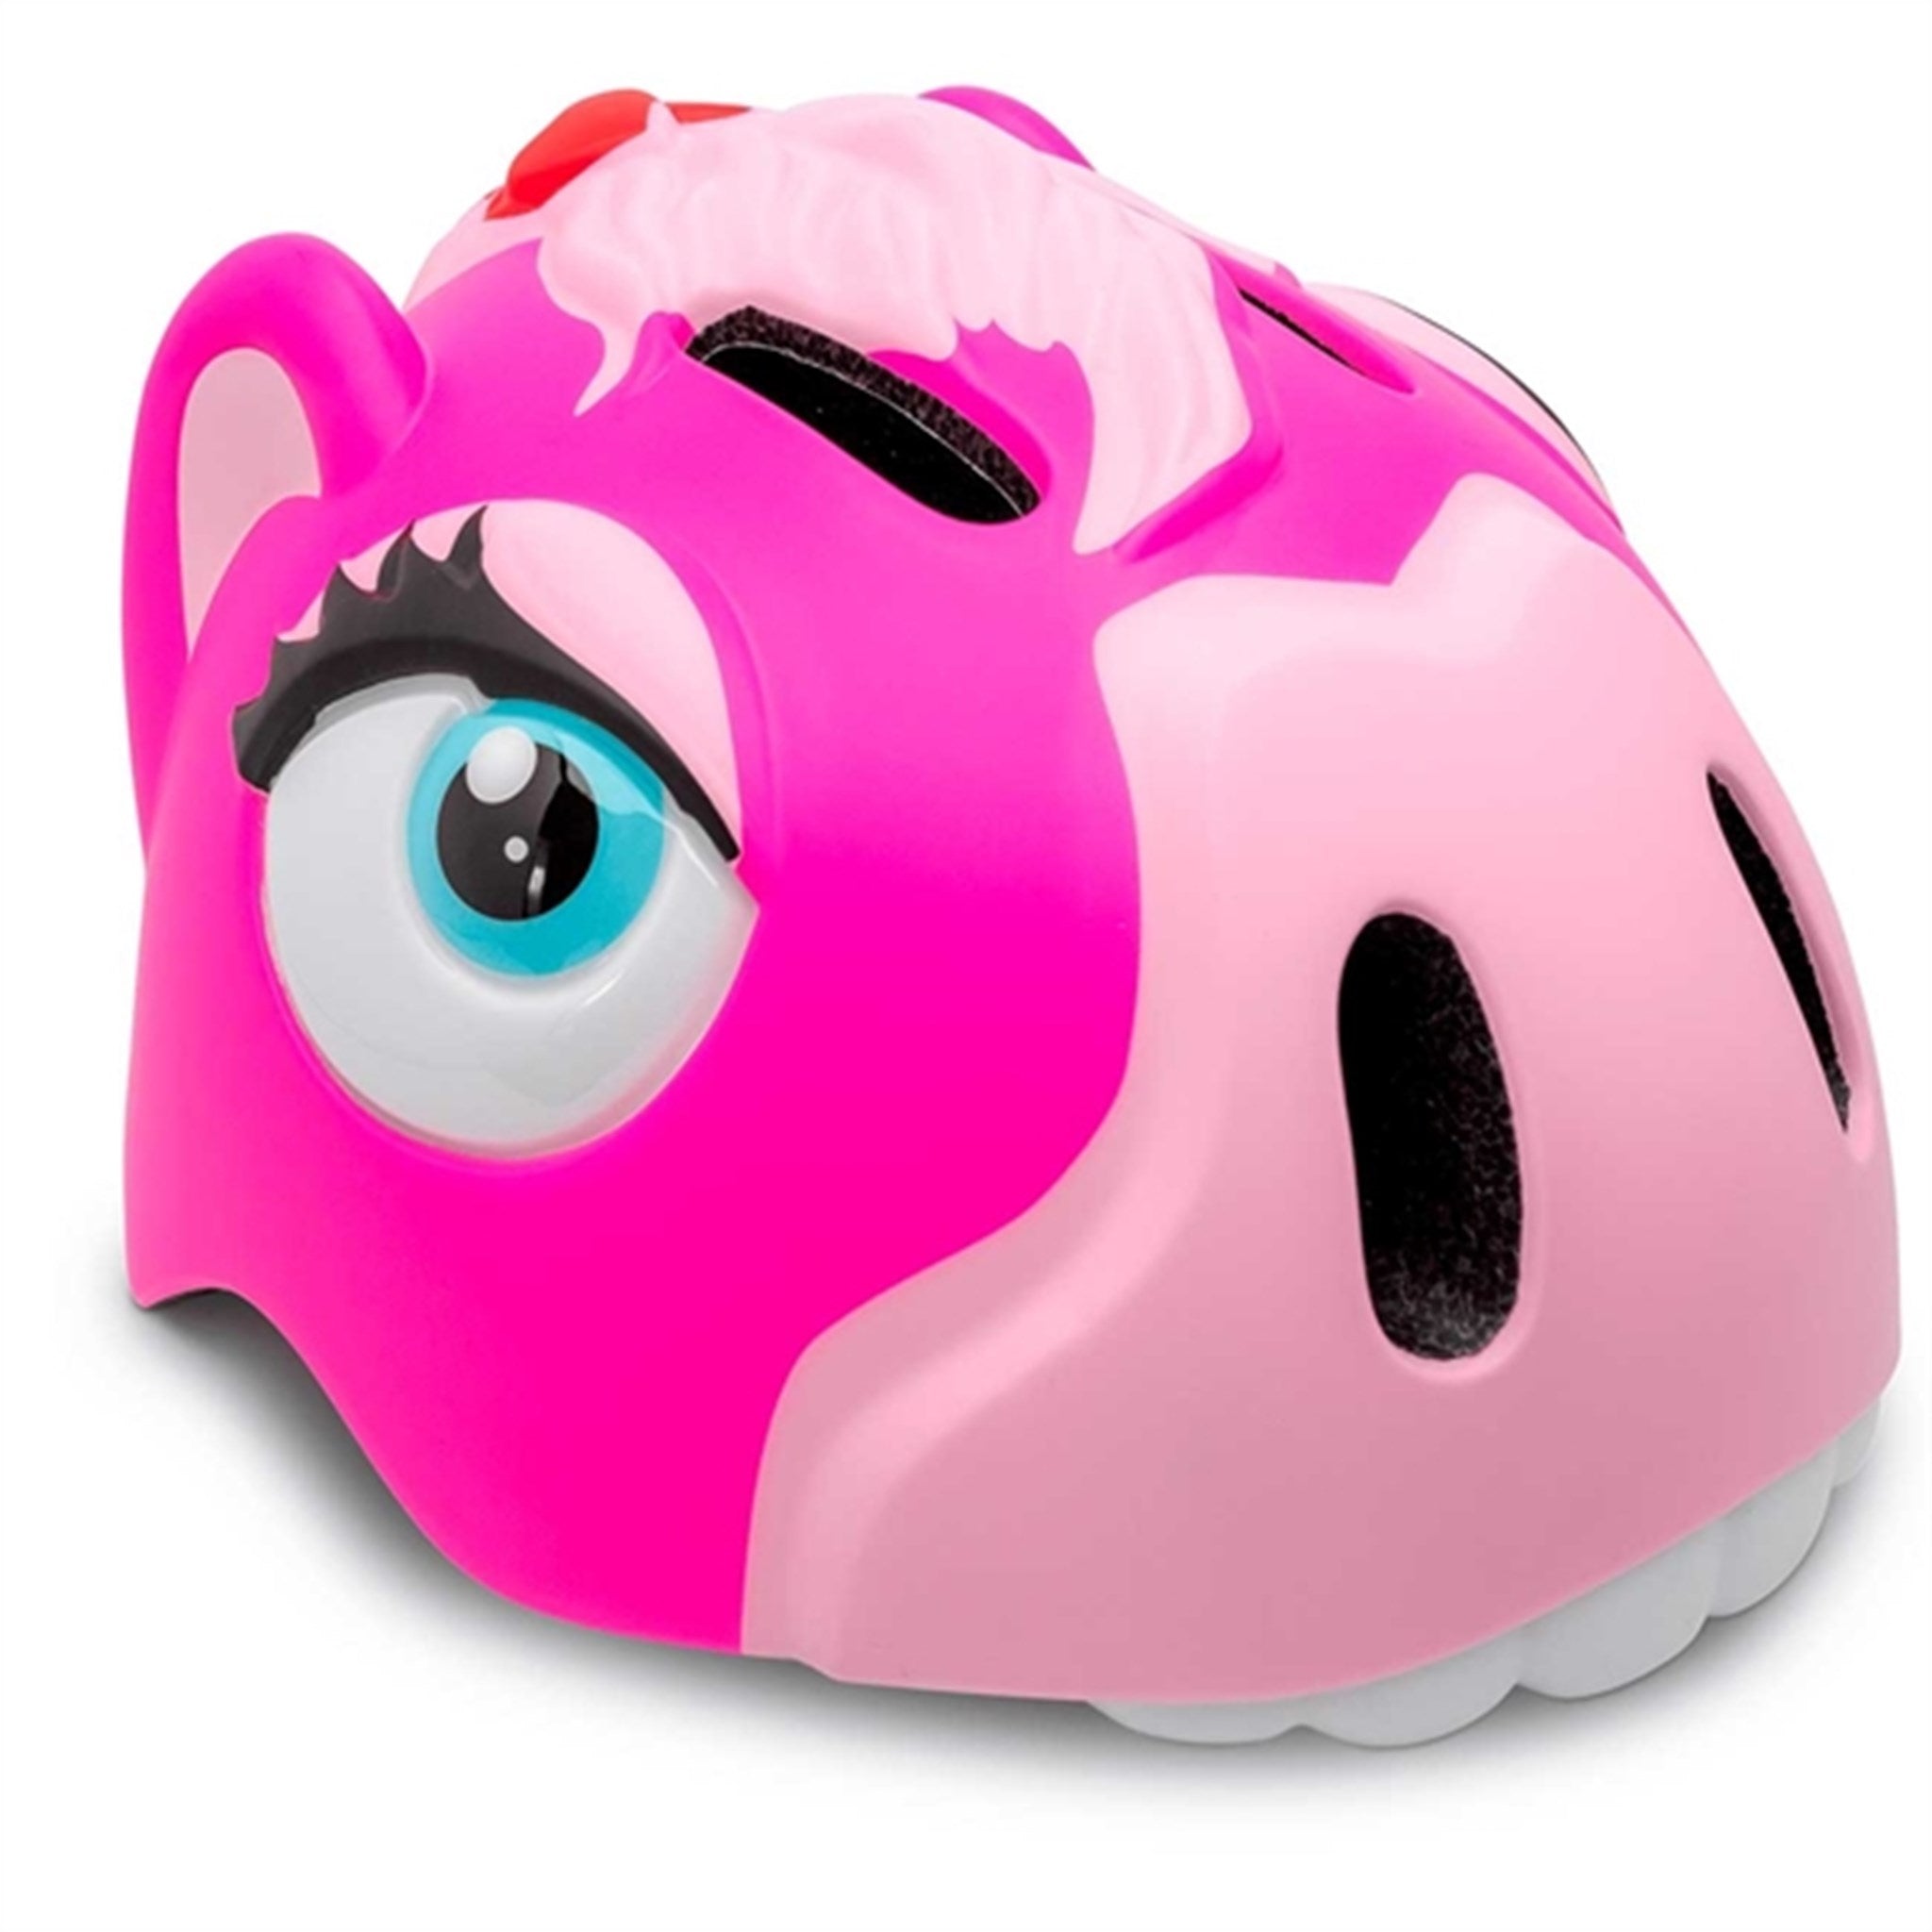 Crazy Safety Horse Bicycle Helmet Pink